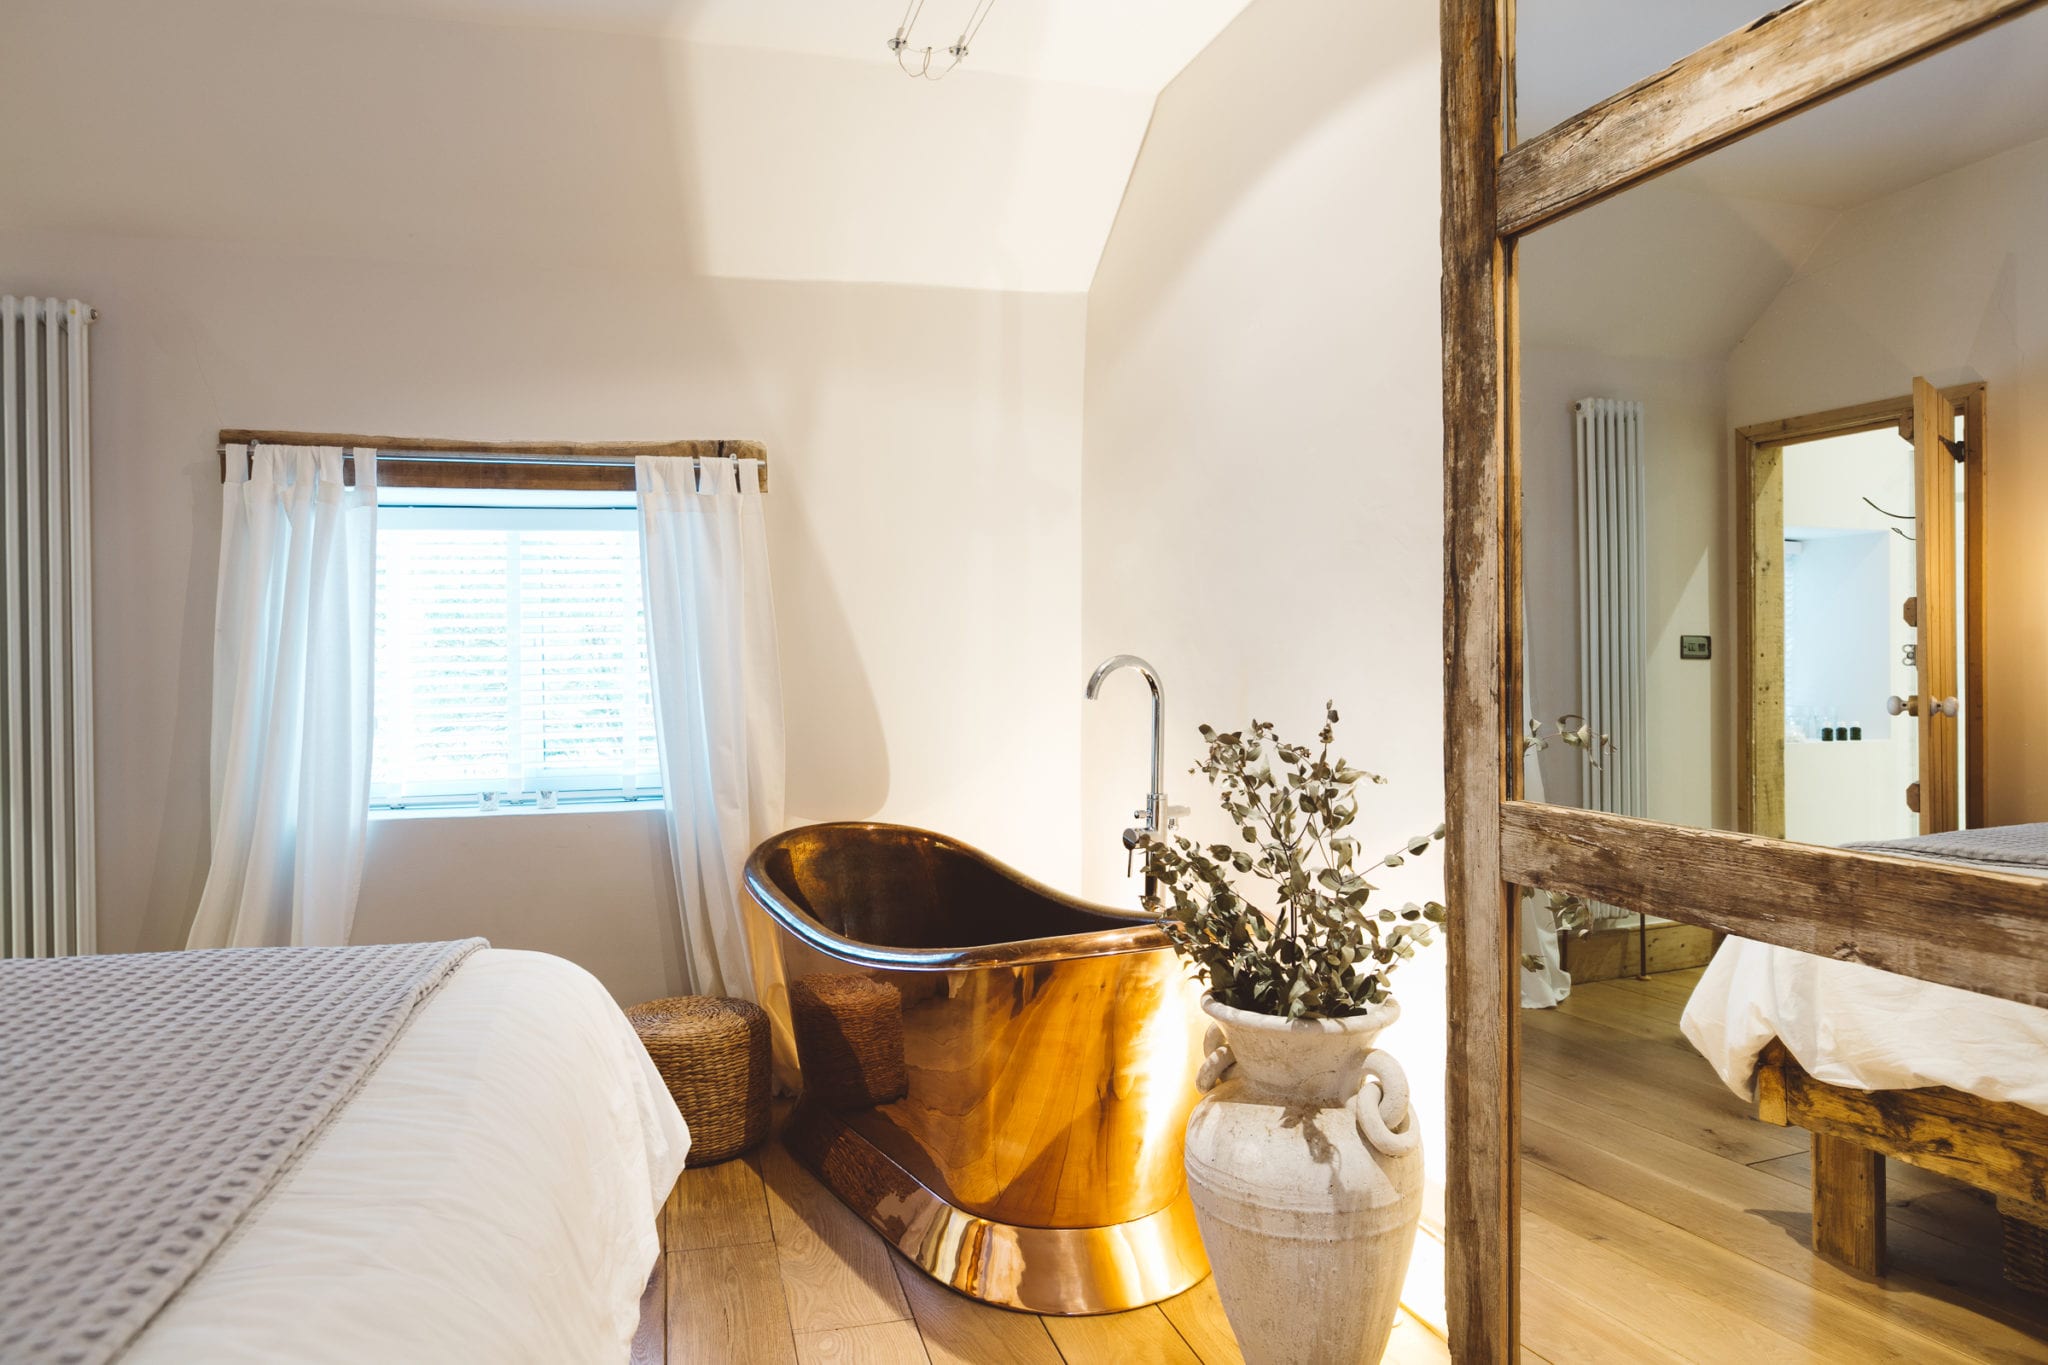 A copper roll top bath tub in Ivy Cottage's master bedroom